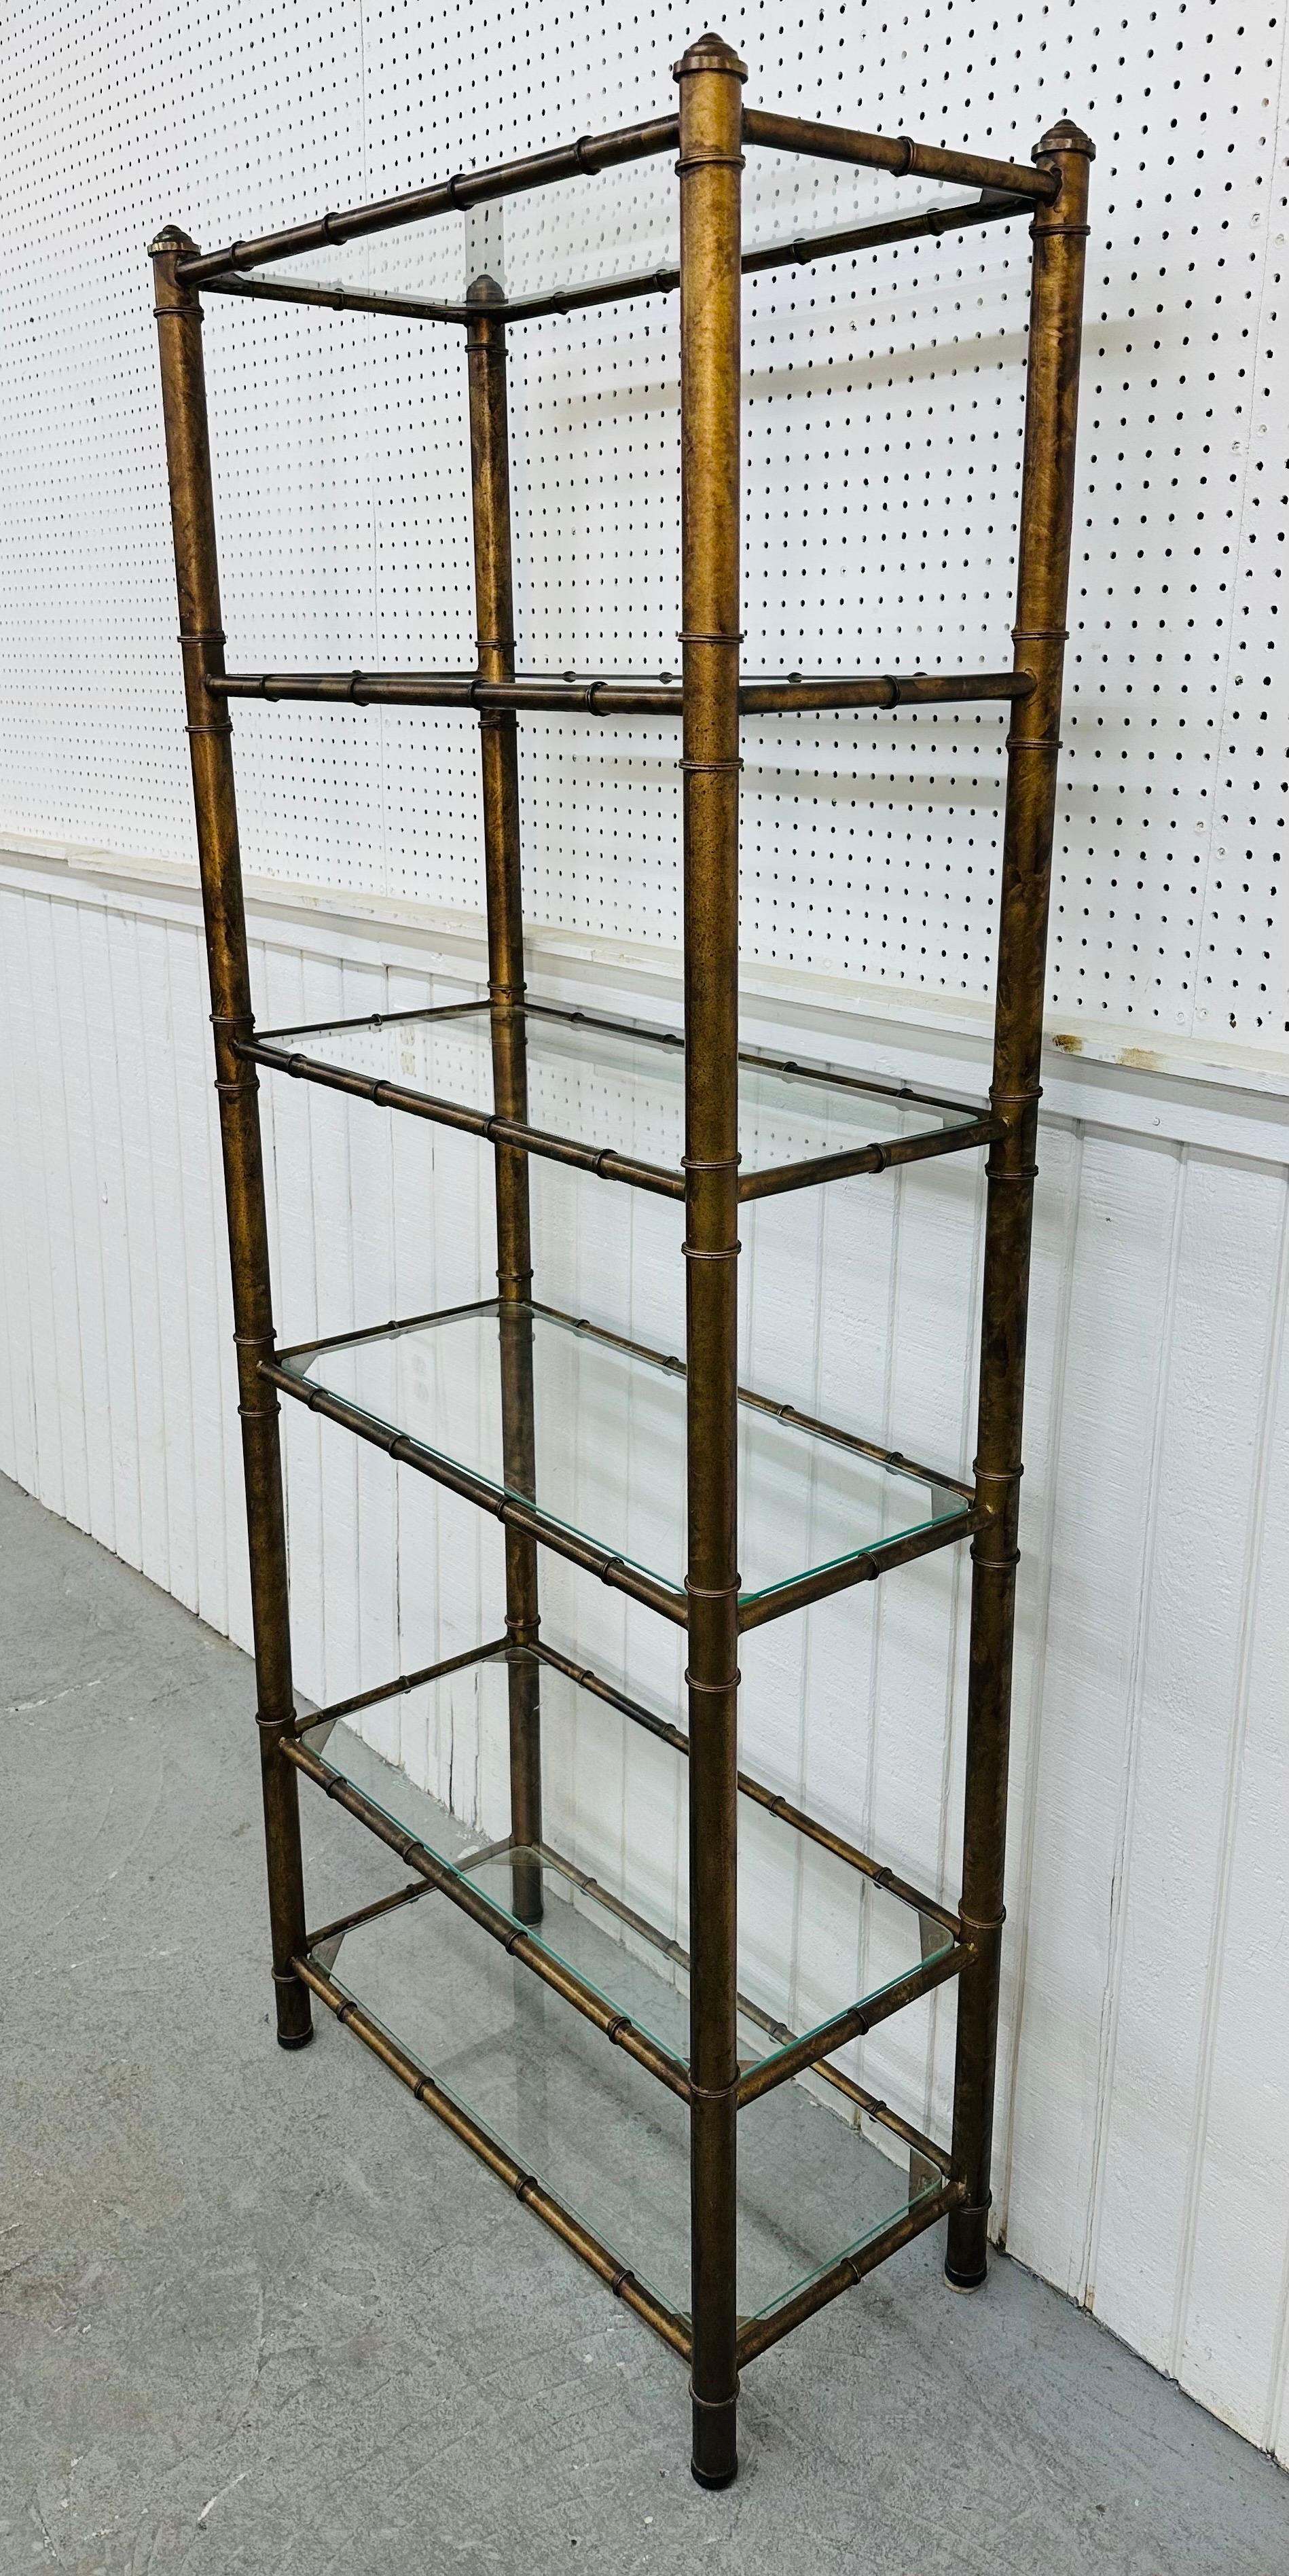 This listing is for a vintage Faux Bamboo Glass Etagere. Featuring a boho chic faux bamboo design, six glass shelves for storage, and a beautiful antique brass finish. This is an exceptional combination of quality and design!